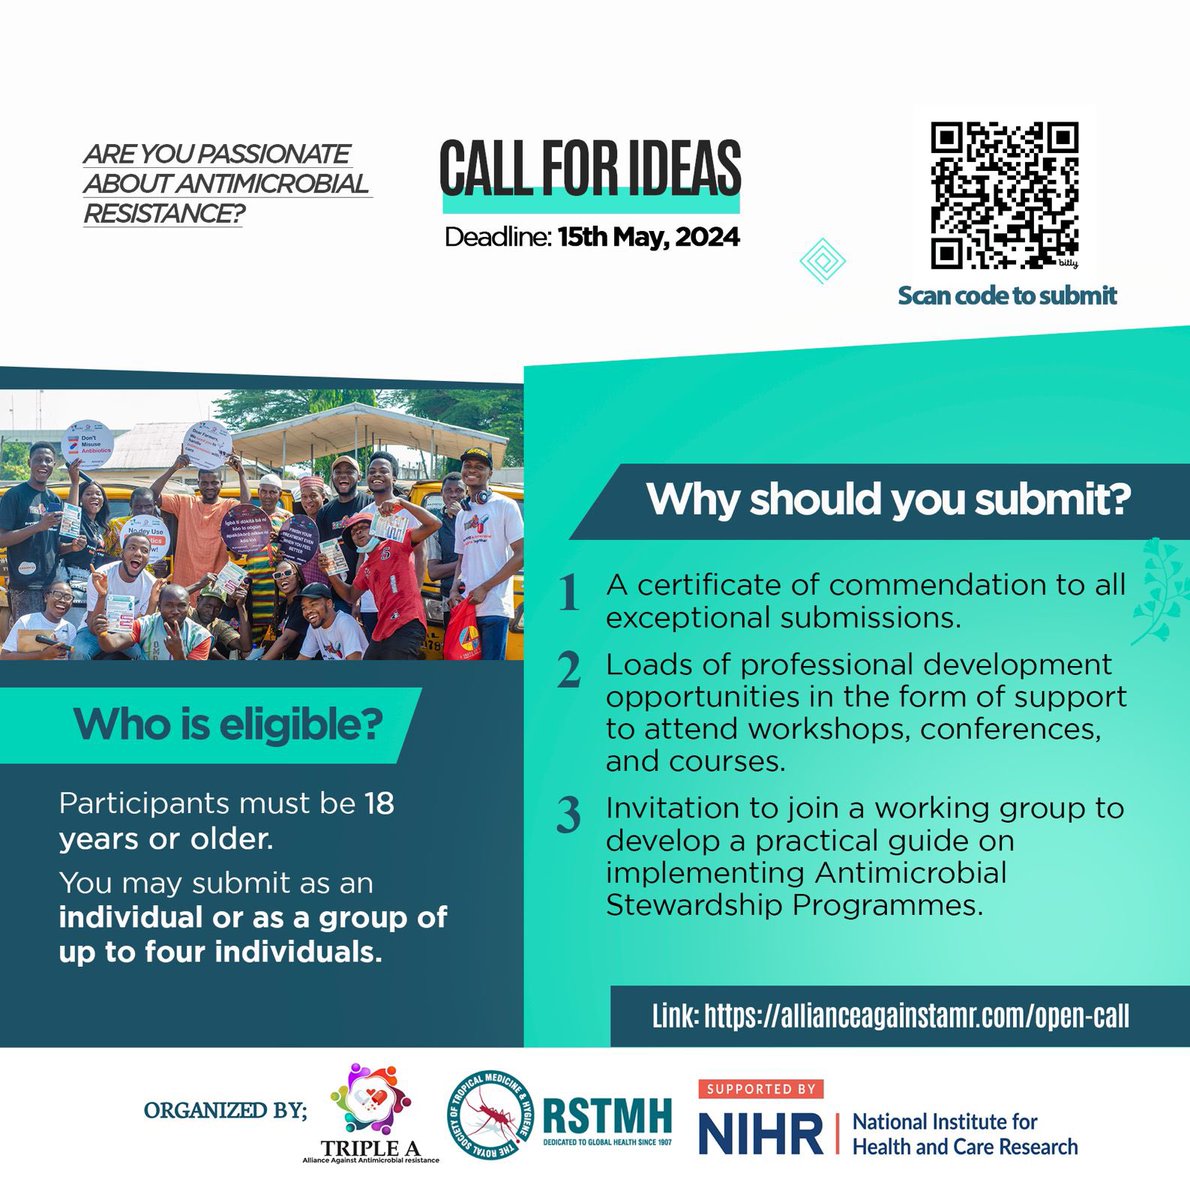 Share ideas and practical tips on antimicrobial stewardship programmes. Your ideas will inform the development of a framework for implementing antimicrobial stewardship programmes at PHCs. Read more about the open call here: allianceagainstamr.com/open-call/